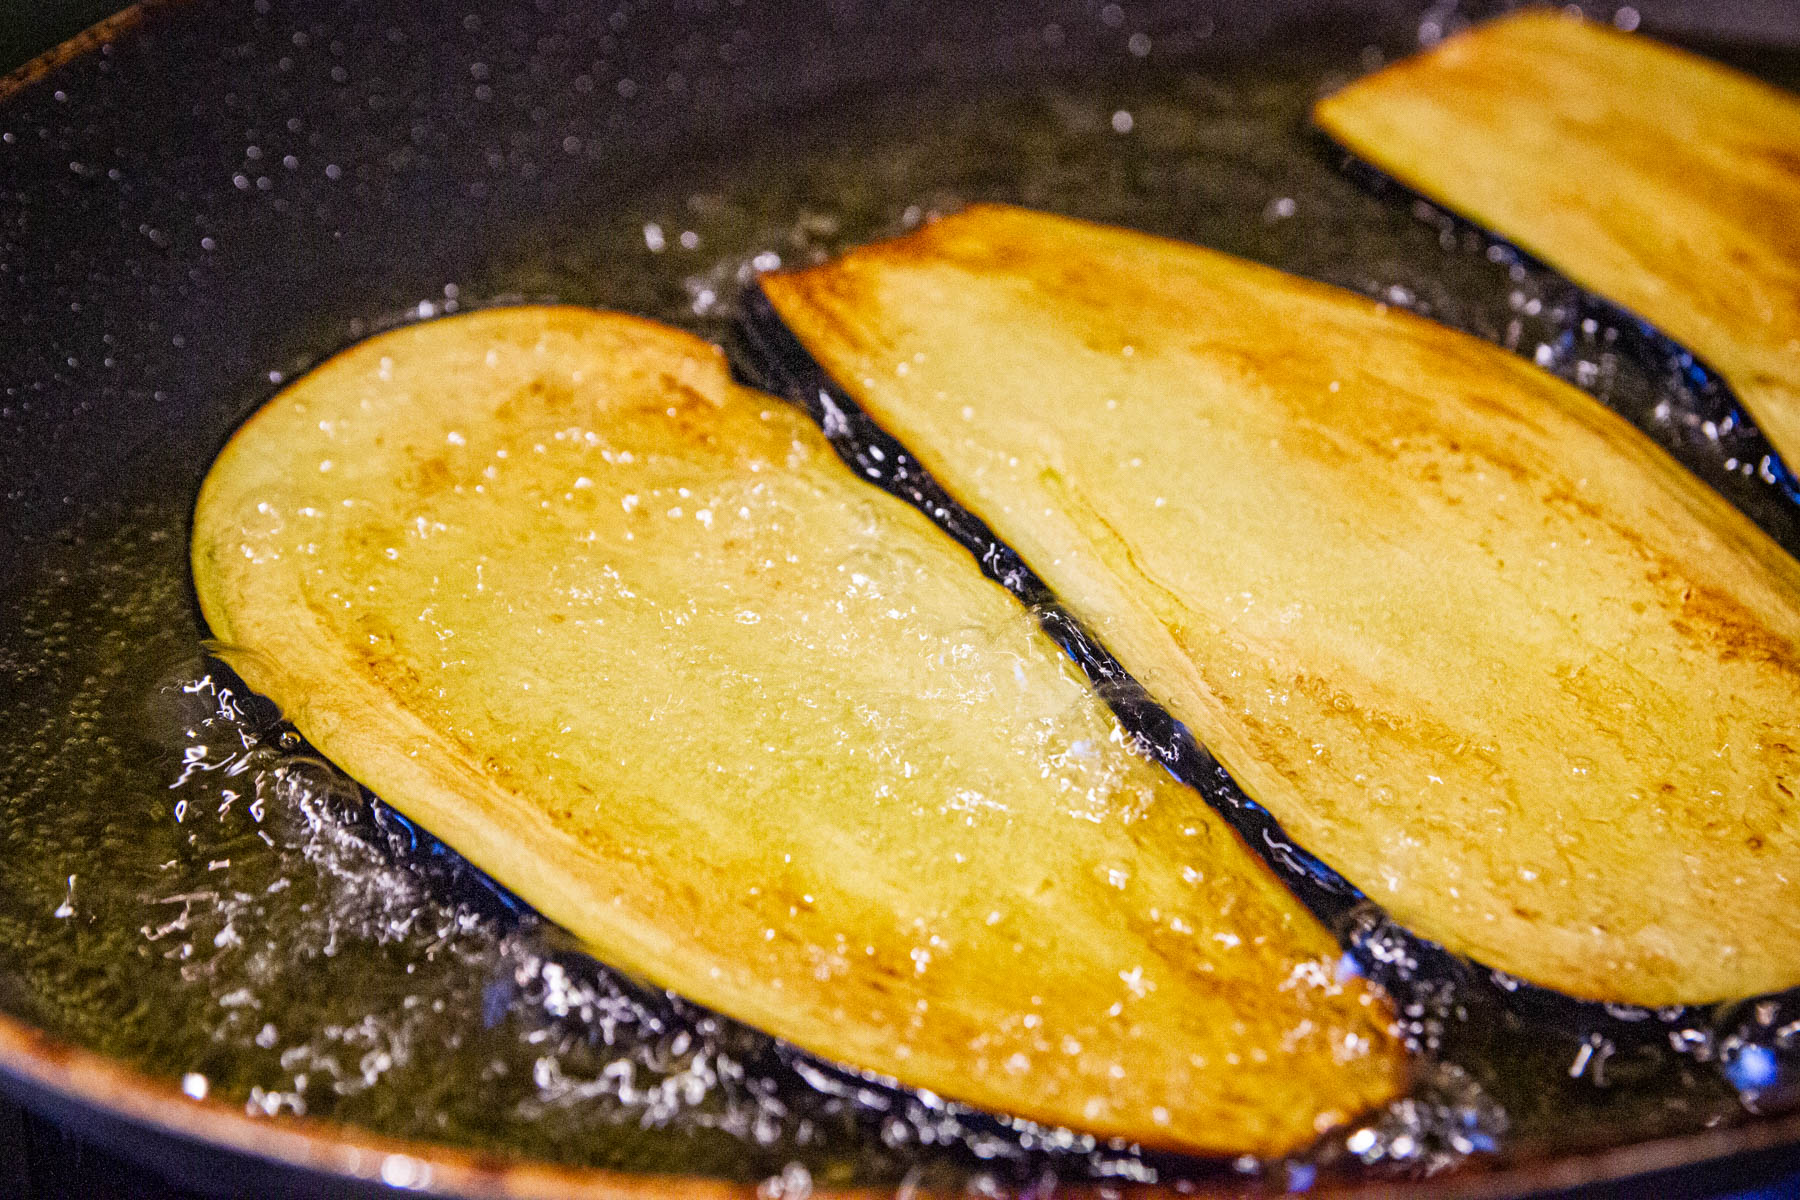 Frying the eggplant slices..